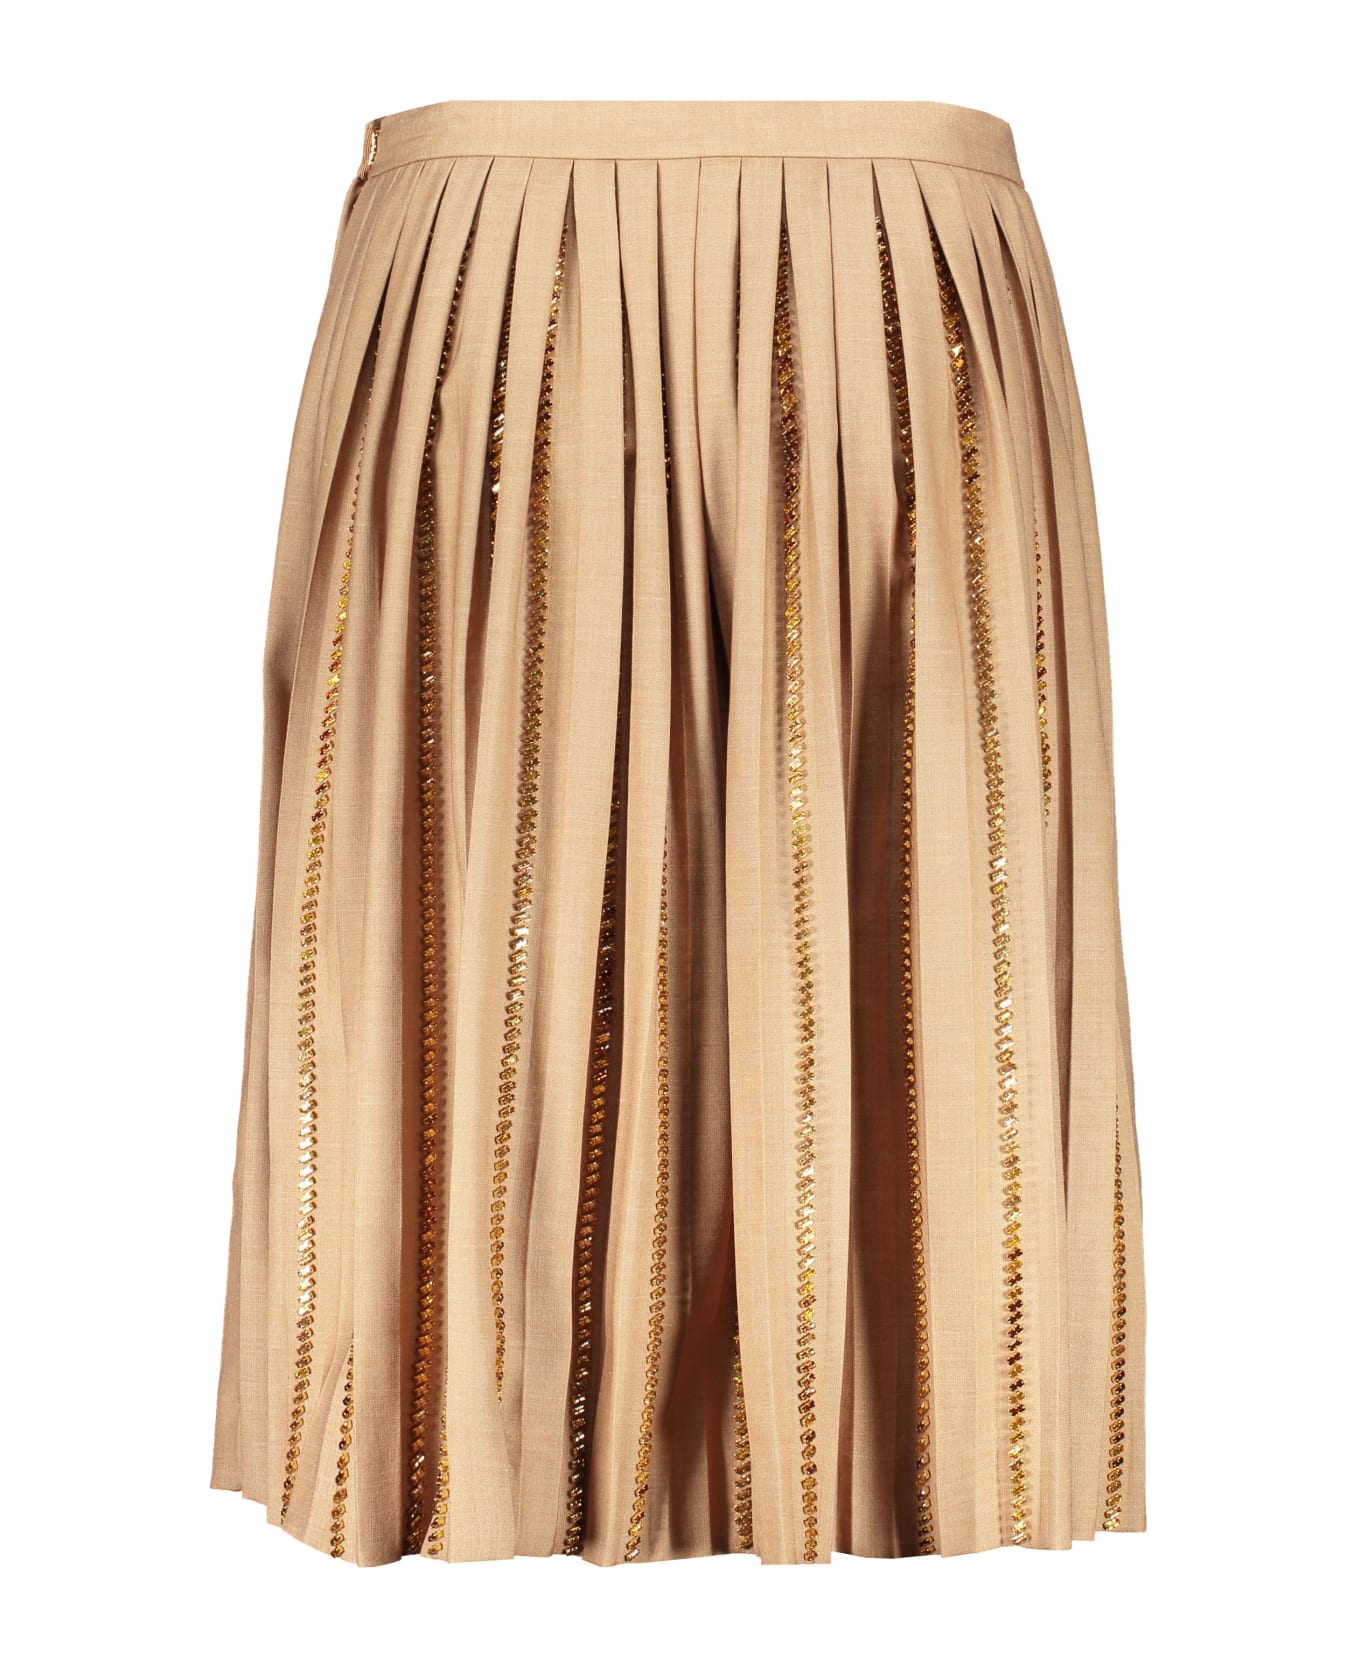 Burberry Pleated Skirt - brown